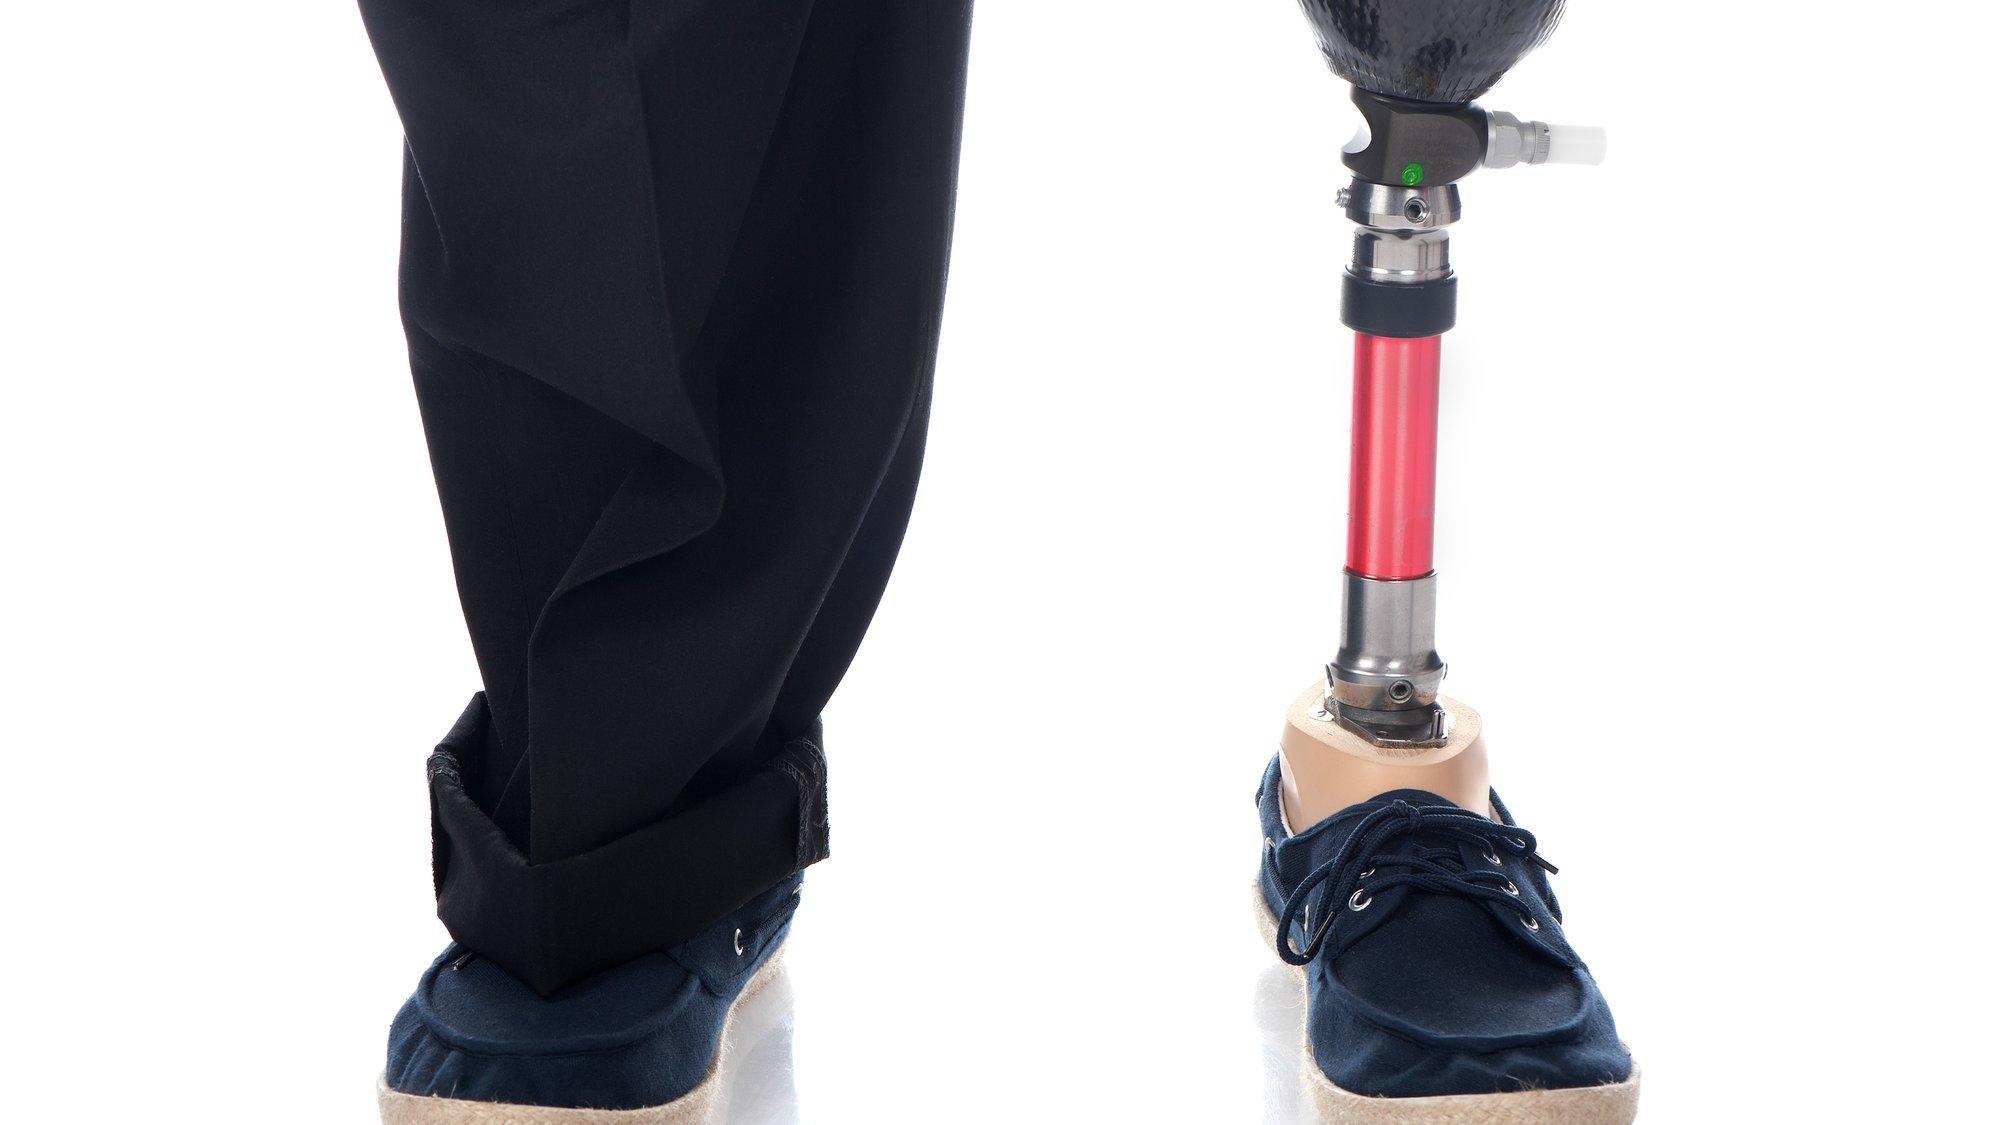 Two legs of an adult man who has a prosthetic lower leg on the left and his healthy leg on the right. Both feet stuck in shoes